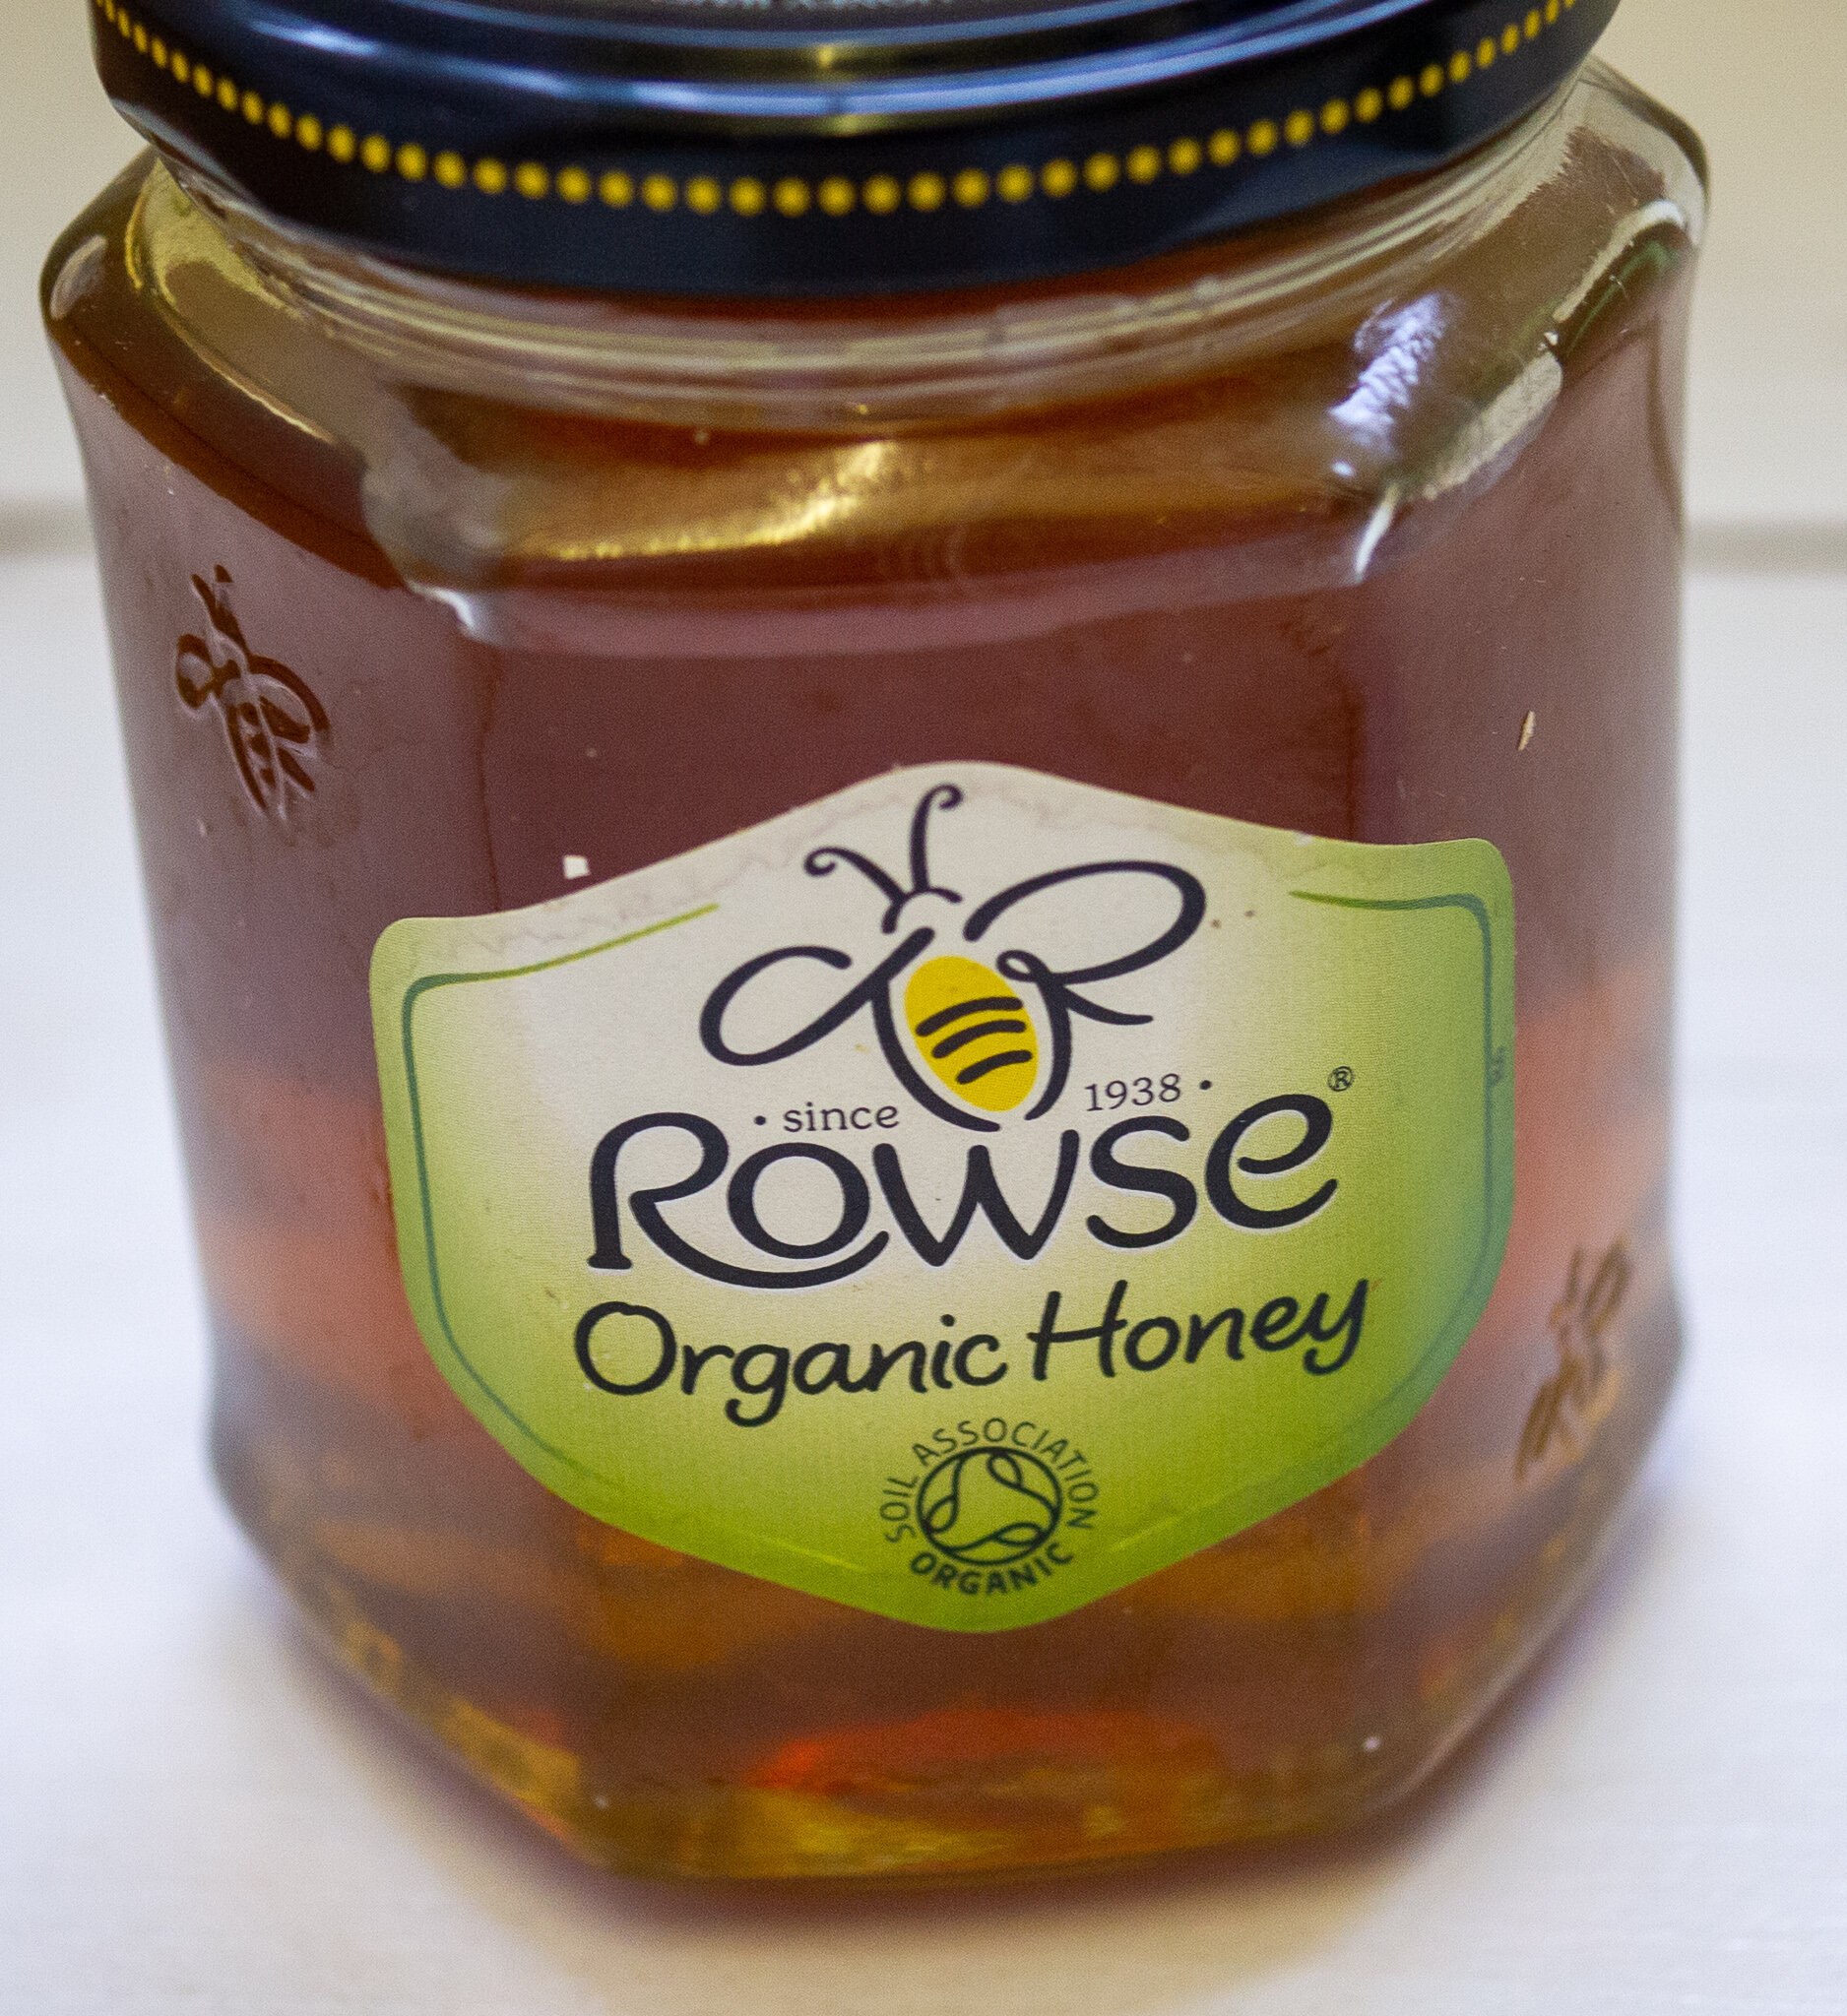 Rowse organic honey is an ingredient for this dressing 